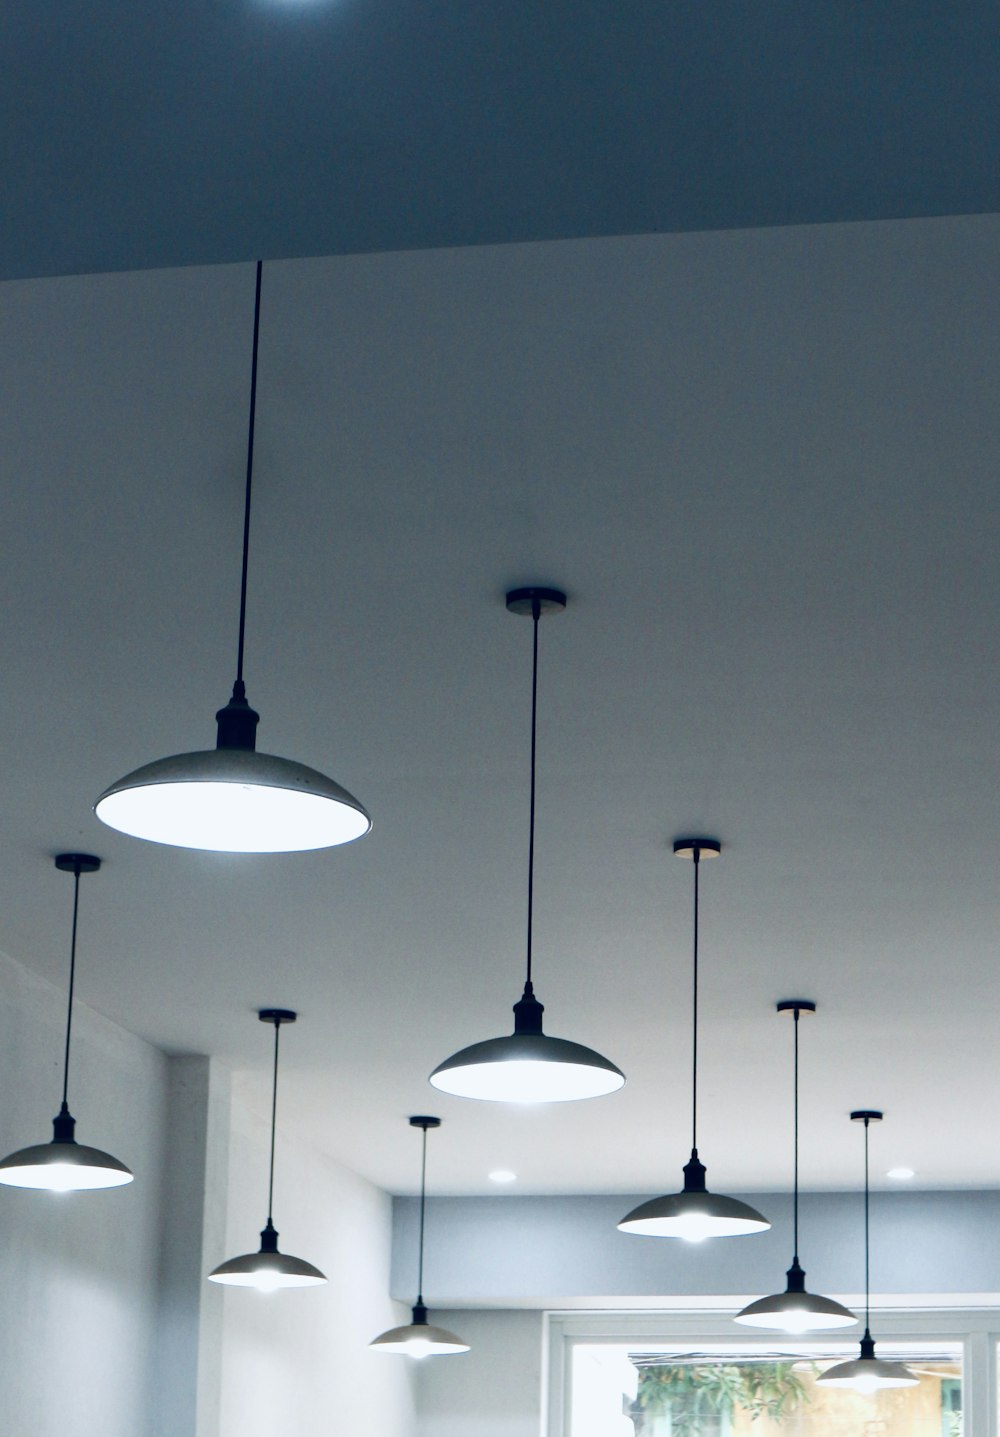 black pendant lamps turned on during daytime